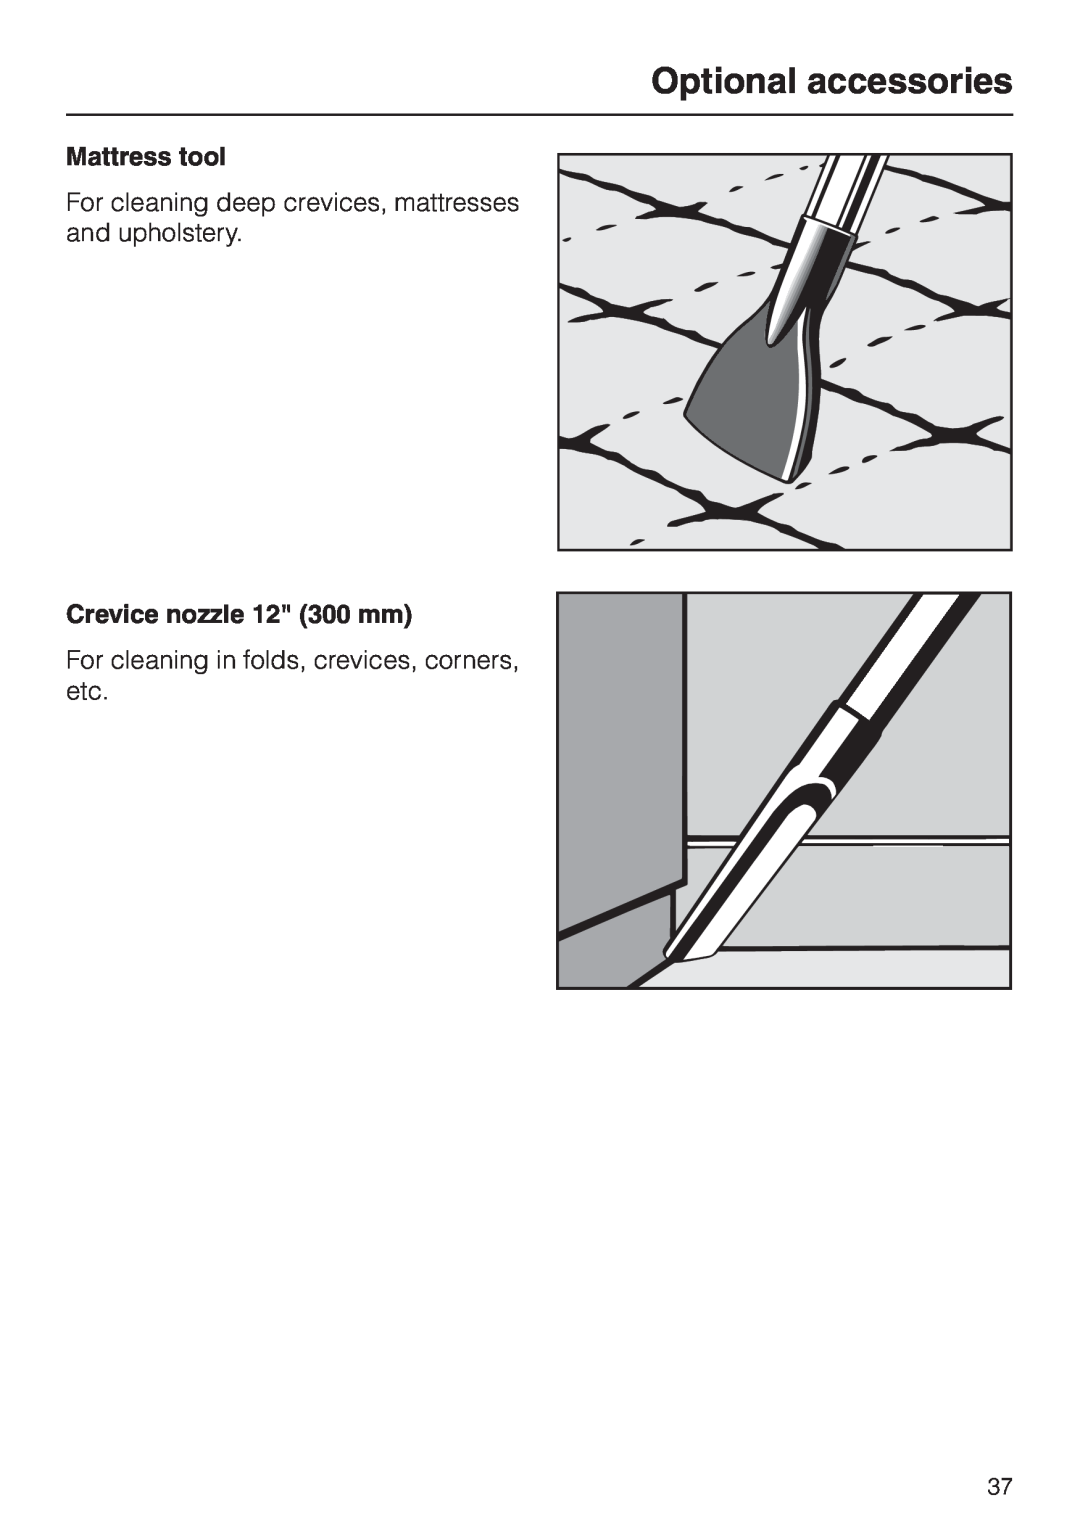 Miele S 4000 Optional accessories, Mattress tool, Crevice nozzle 12 300 mm, For cleaning in folds, crevices, corners, etc 